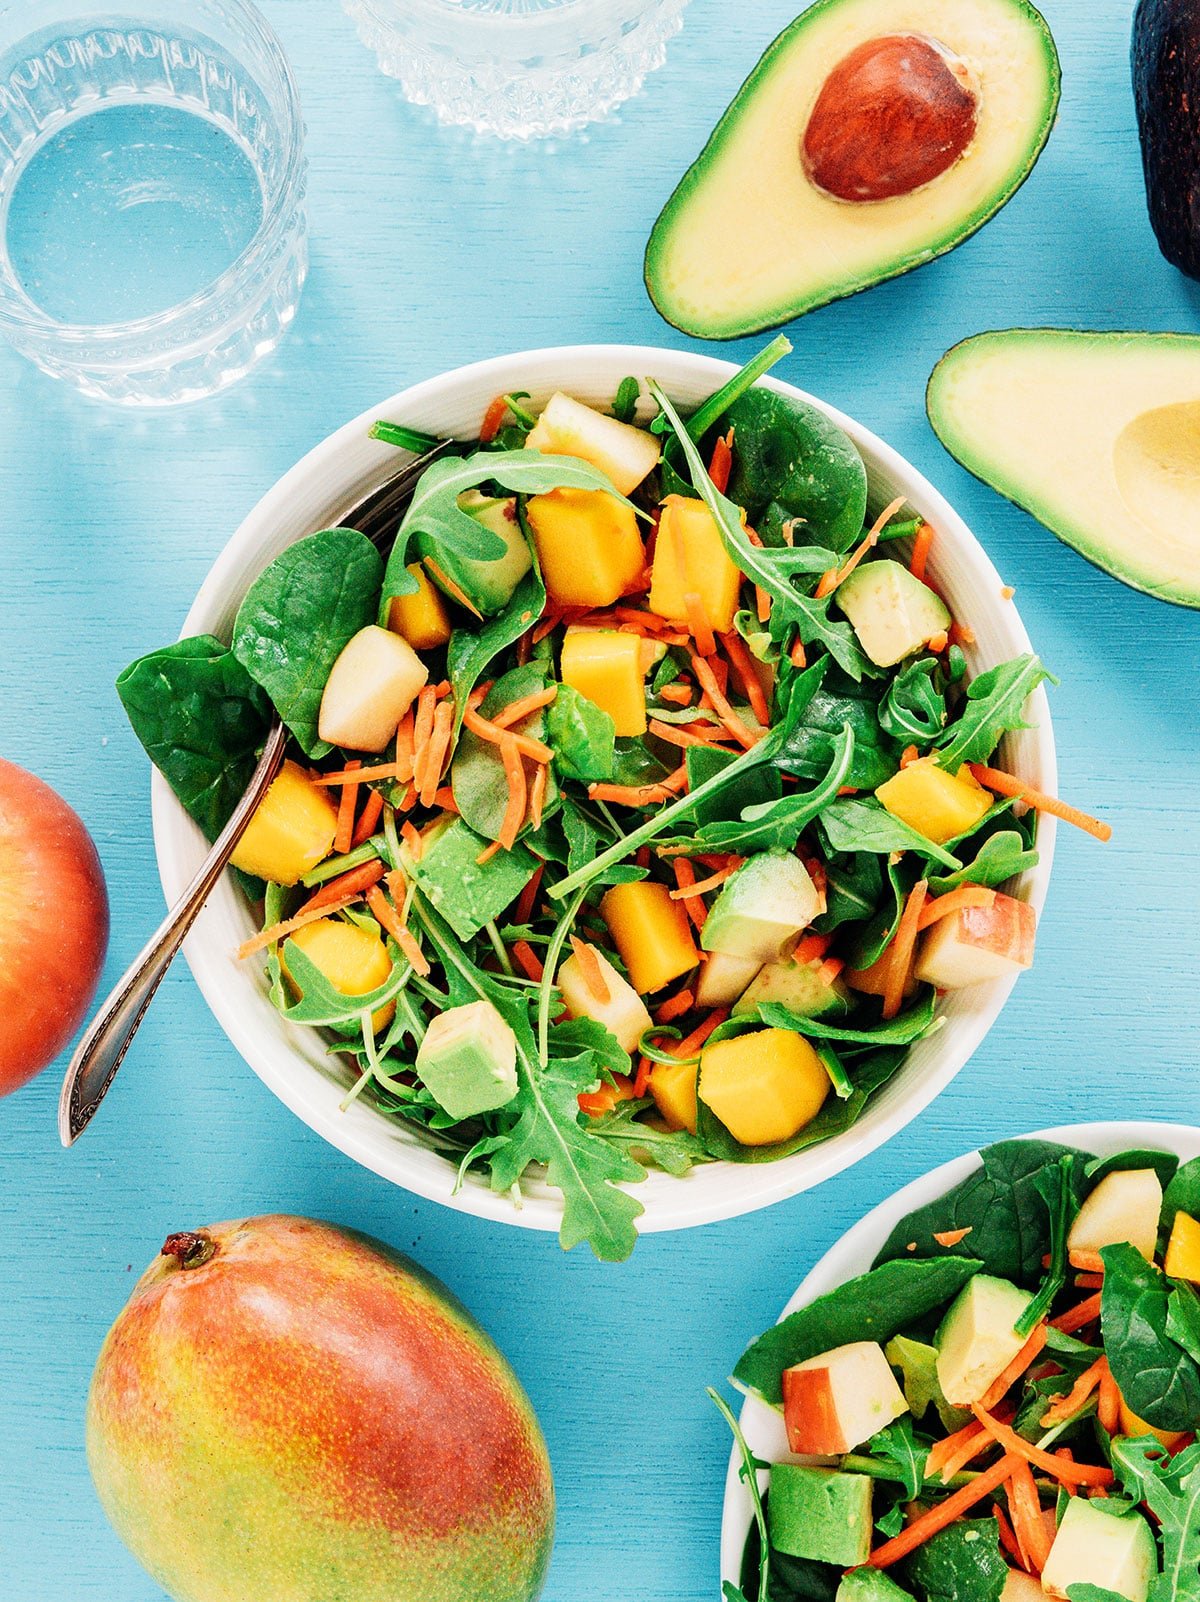 Salad with avocado and mangoes in a white bowl on a blue table